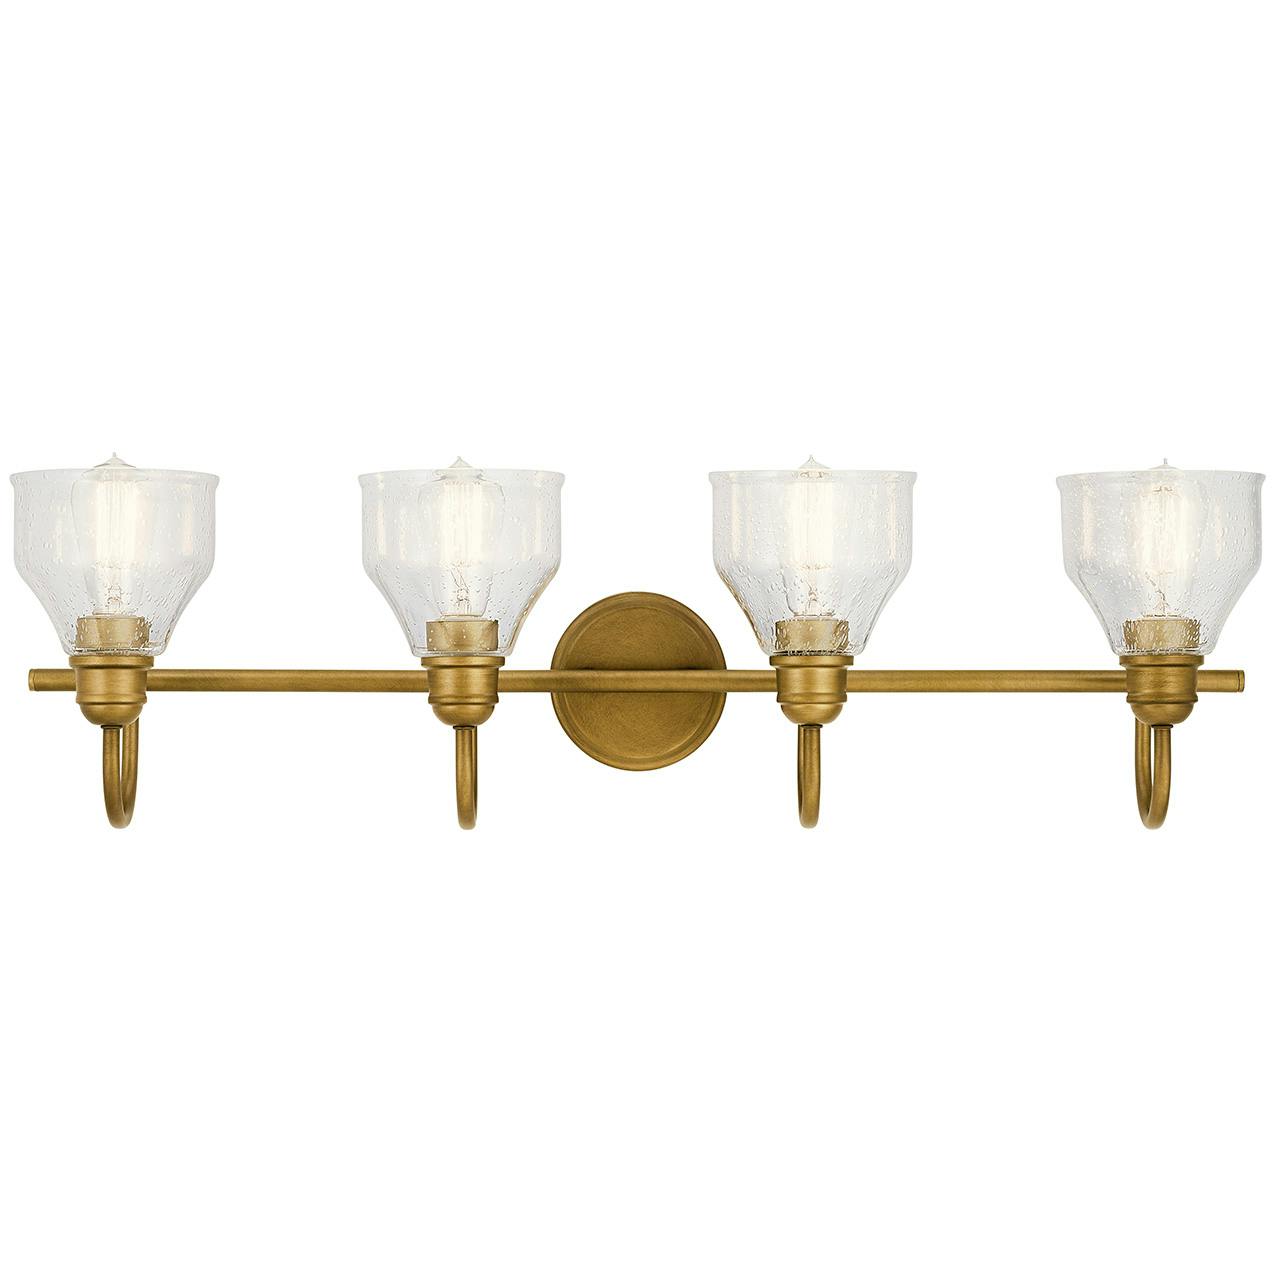 The Avery 4 Light Vanity Light Natural Brass facing up on a white background